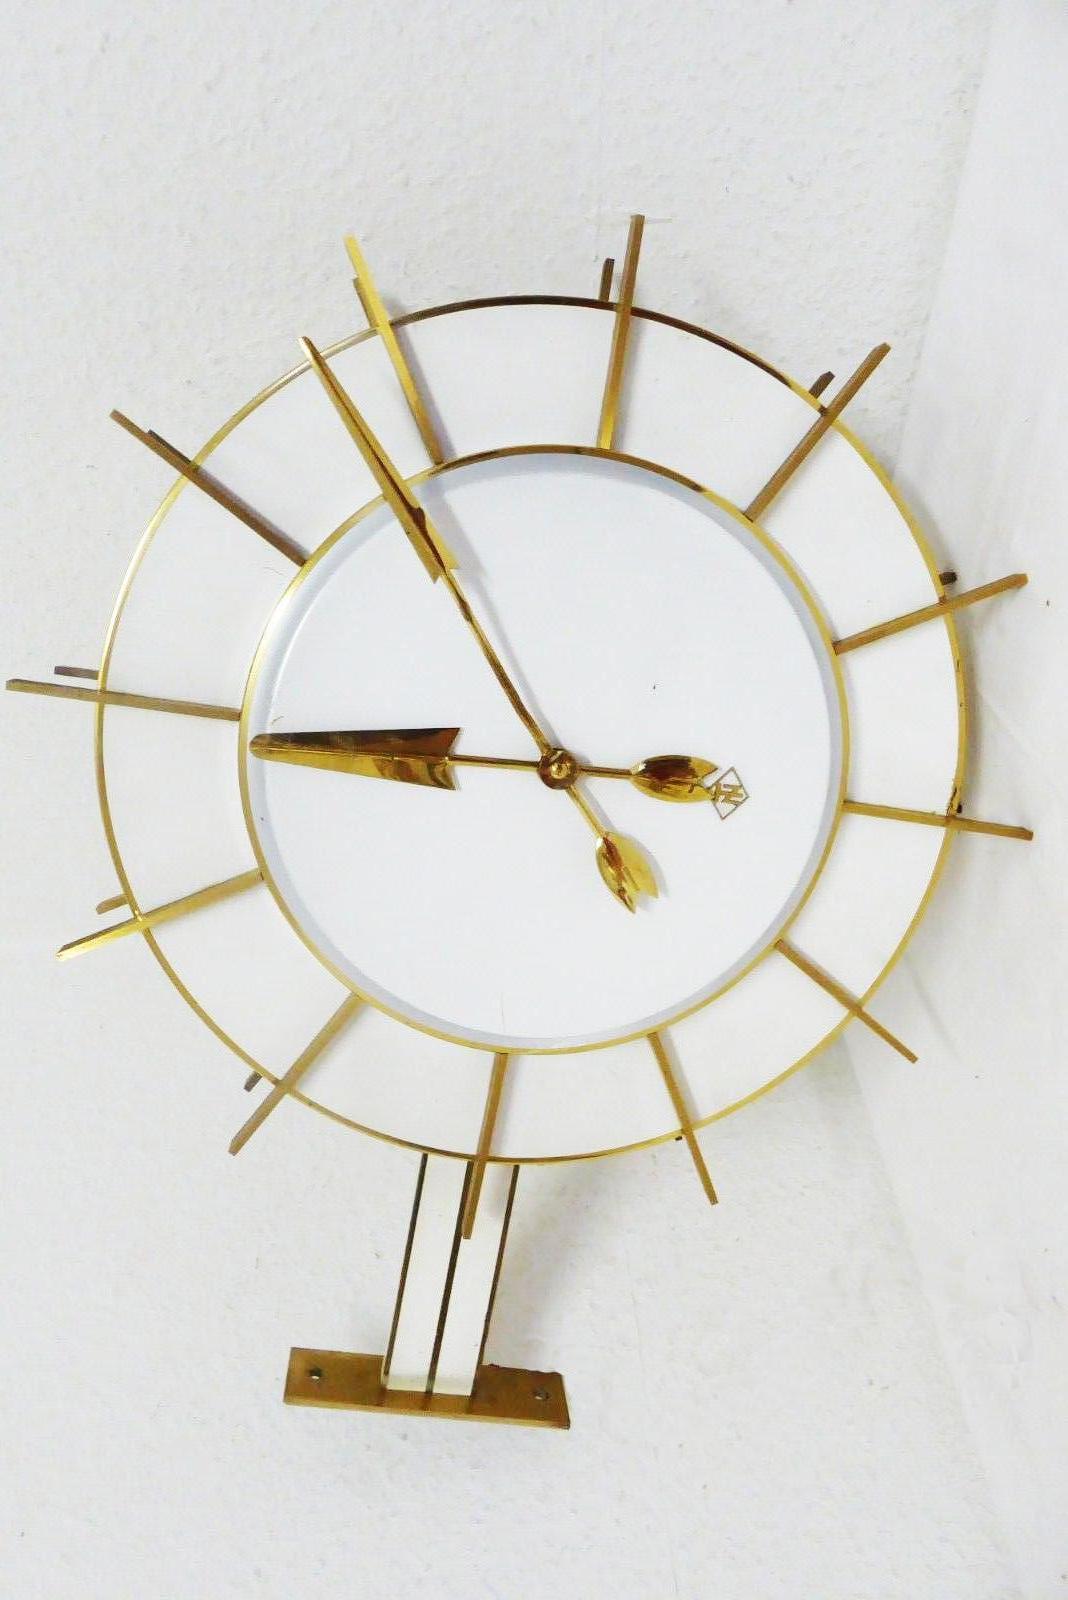 Large German station or factory clock by Telenorma (TN) from the early 1970s. Formerly as a slave clock with mechanical movement will be fitted with a modern quartz movement with a battery.
Brass lacquered. Delivery time about 2-3 weeks. (pictures